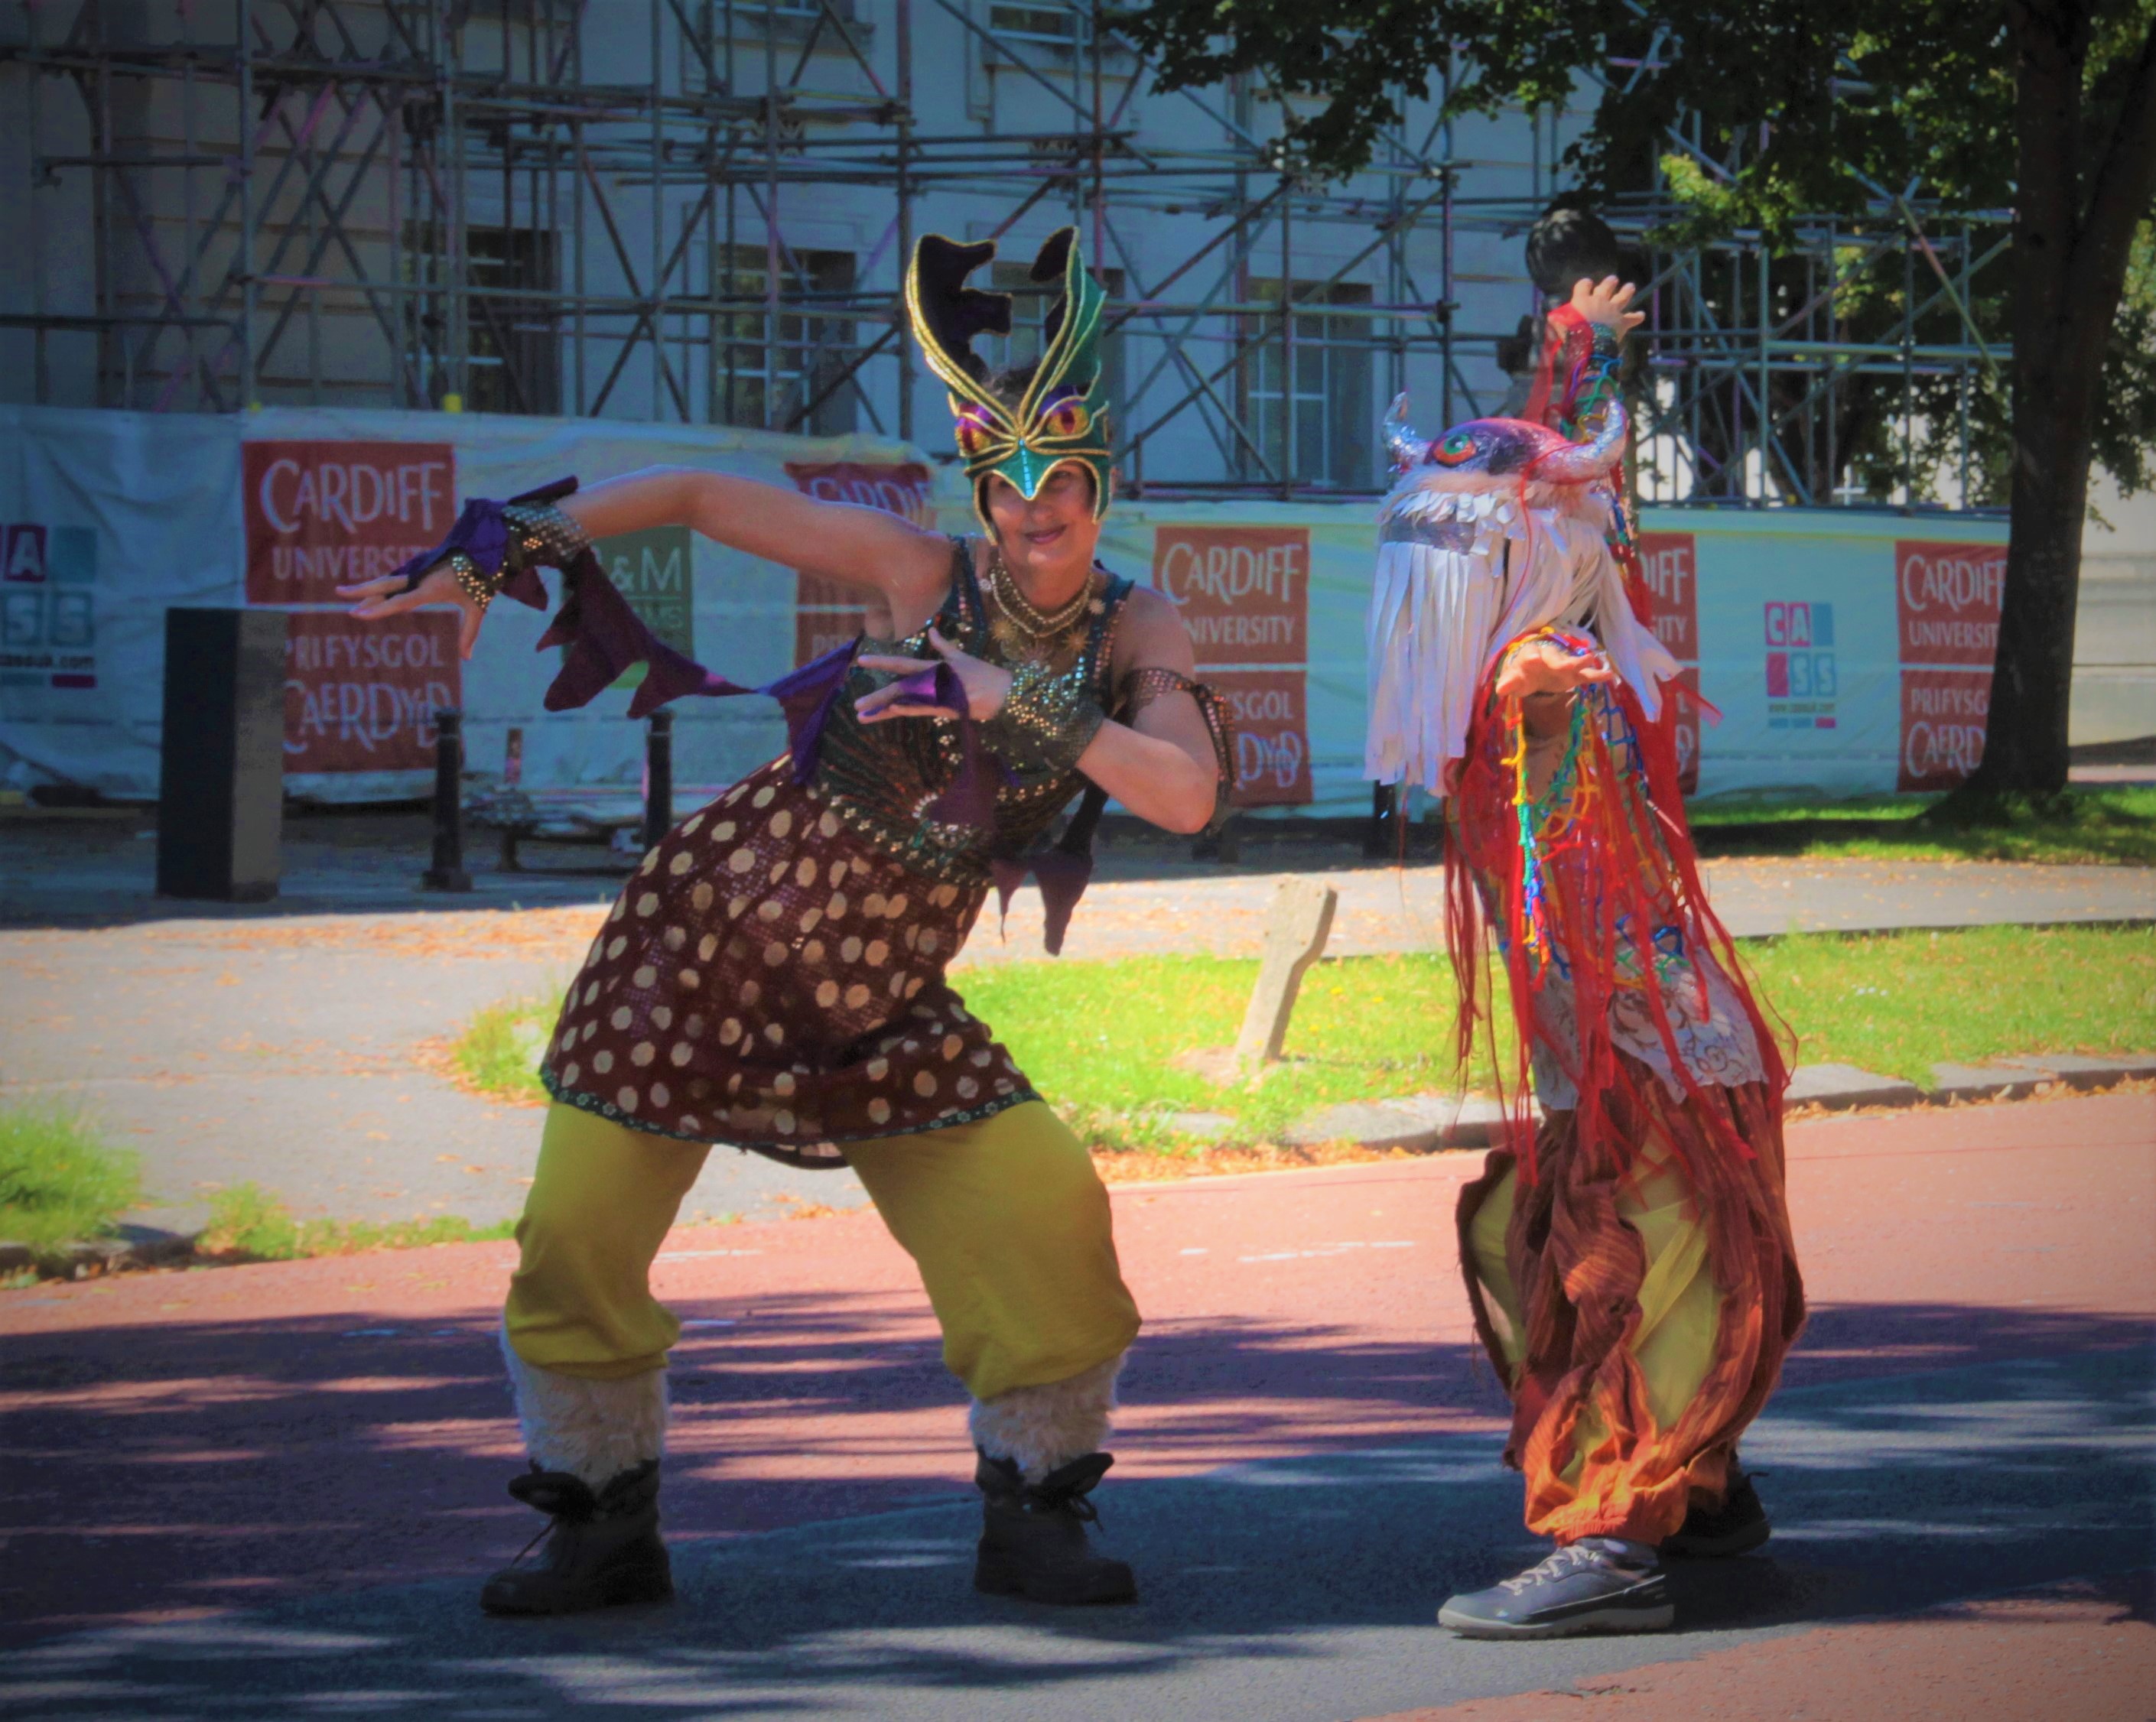 These two characters (the one on the left is me) are the base costumes of my Winds of Change characters, Butetown Carnival 2020